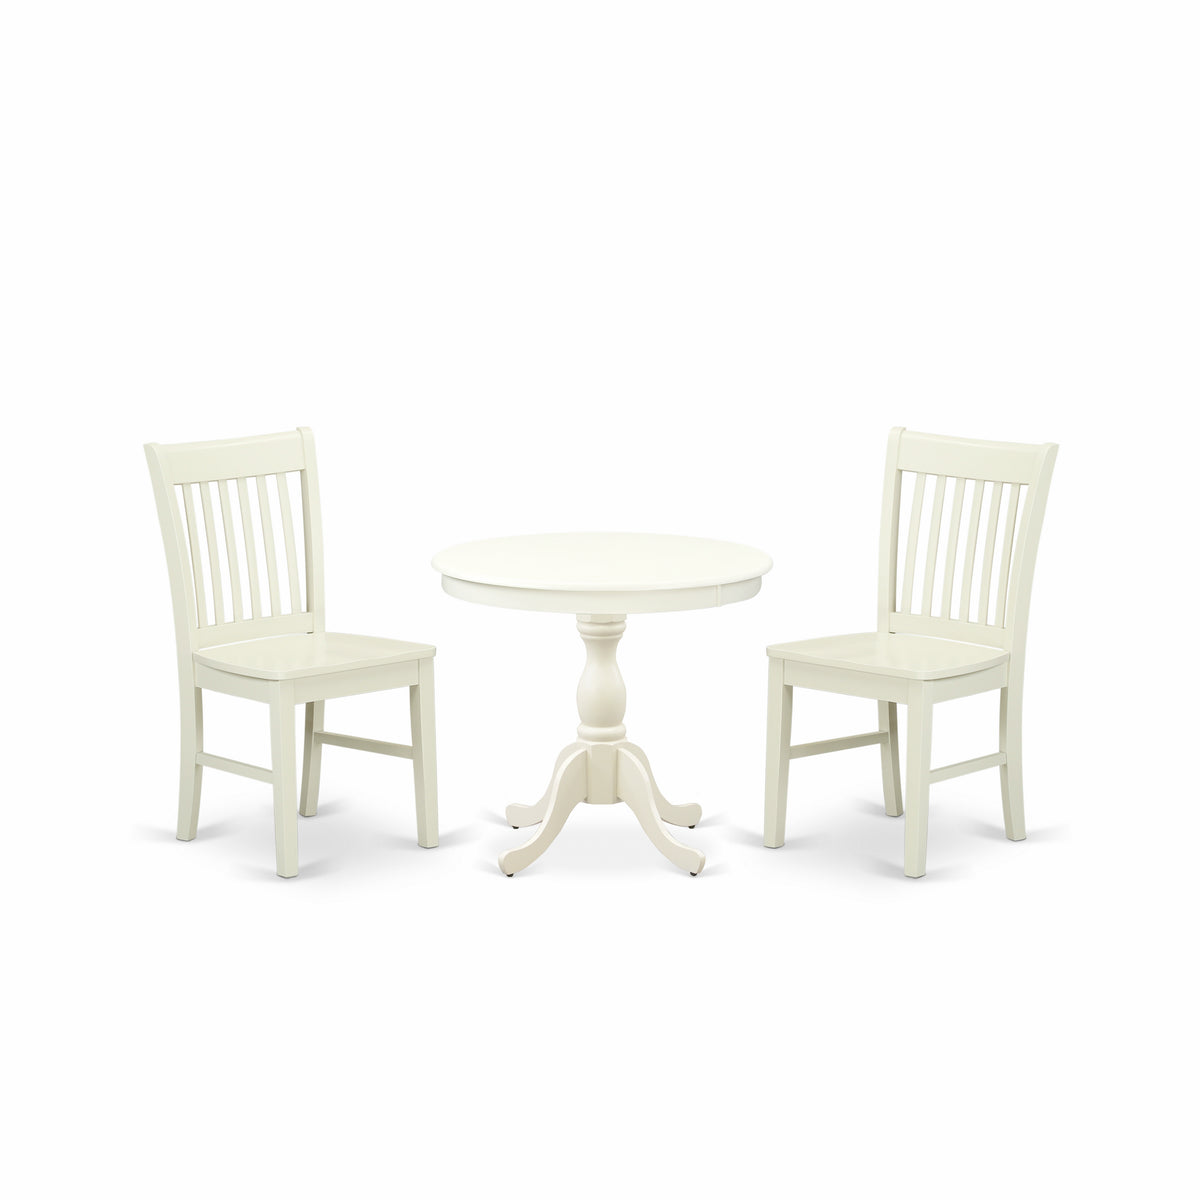 Wood Table and Chairs 3-Piece Set, White